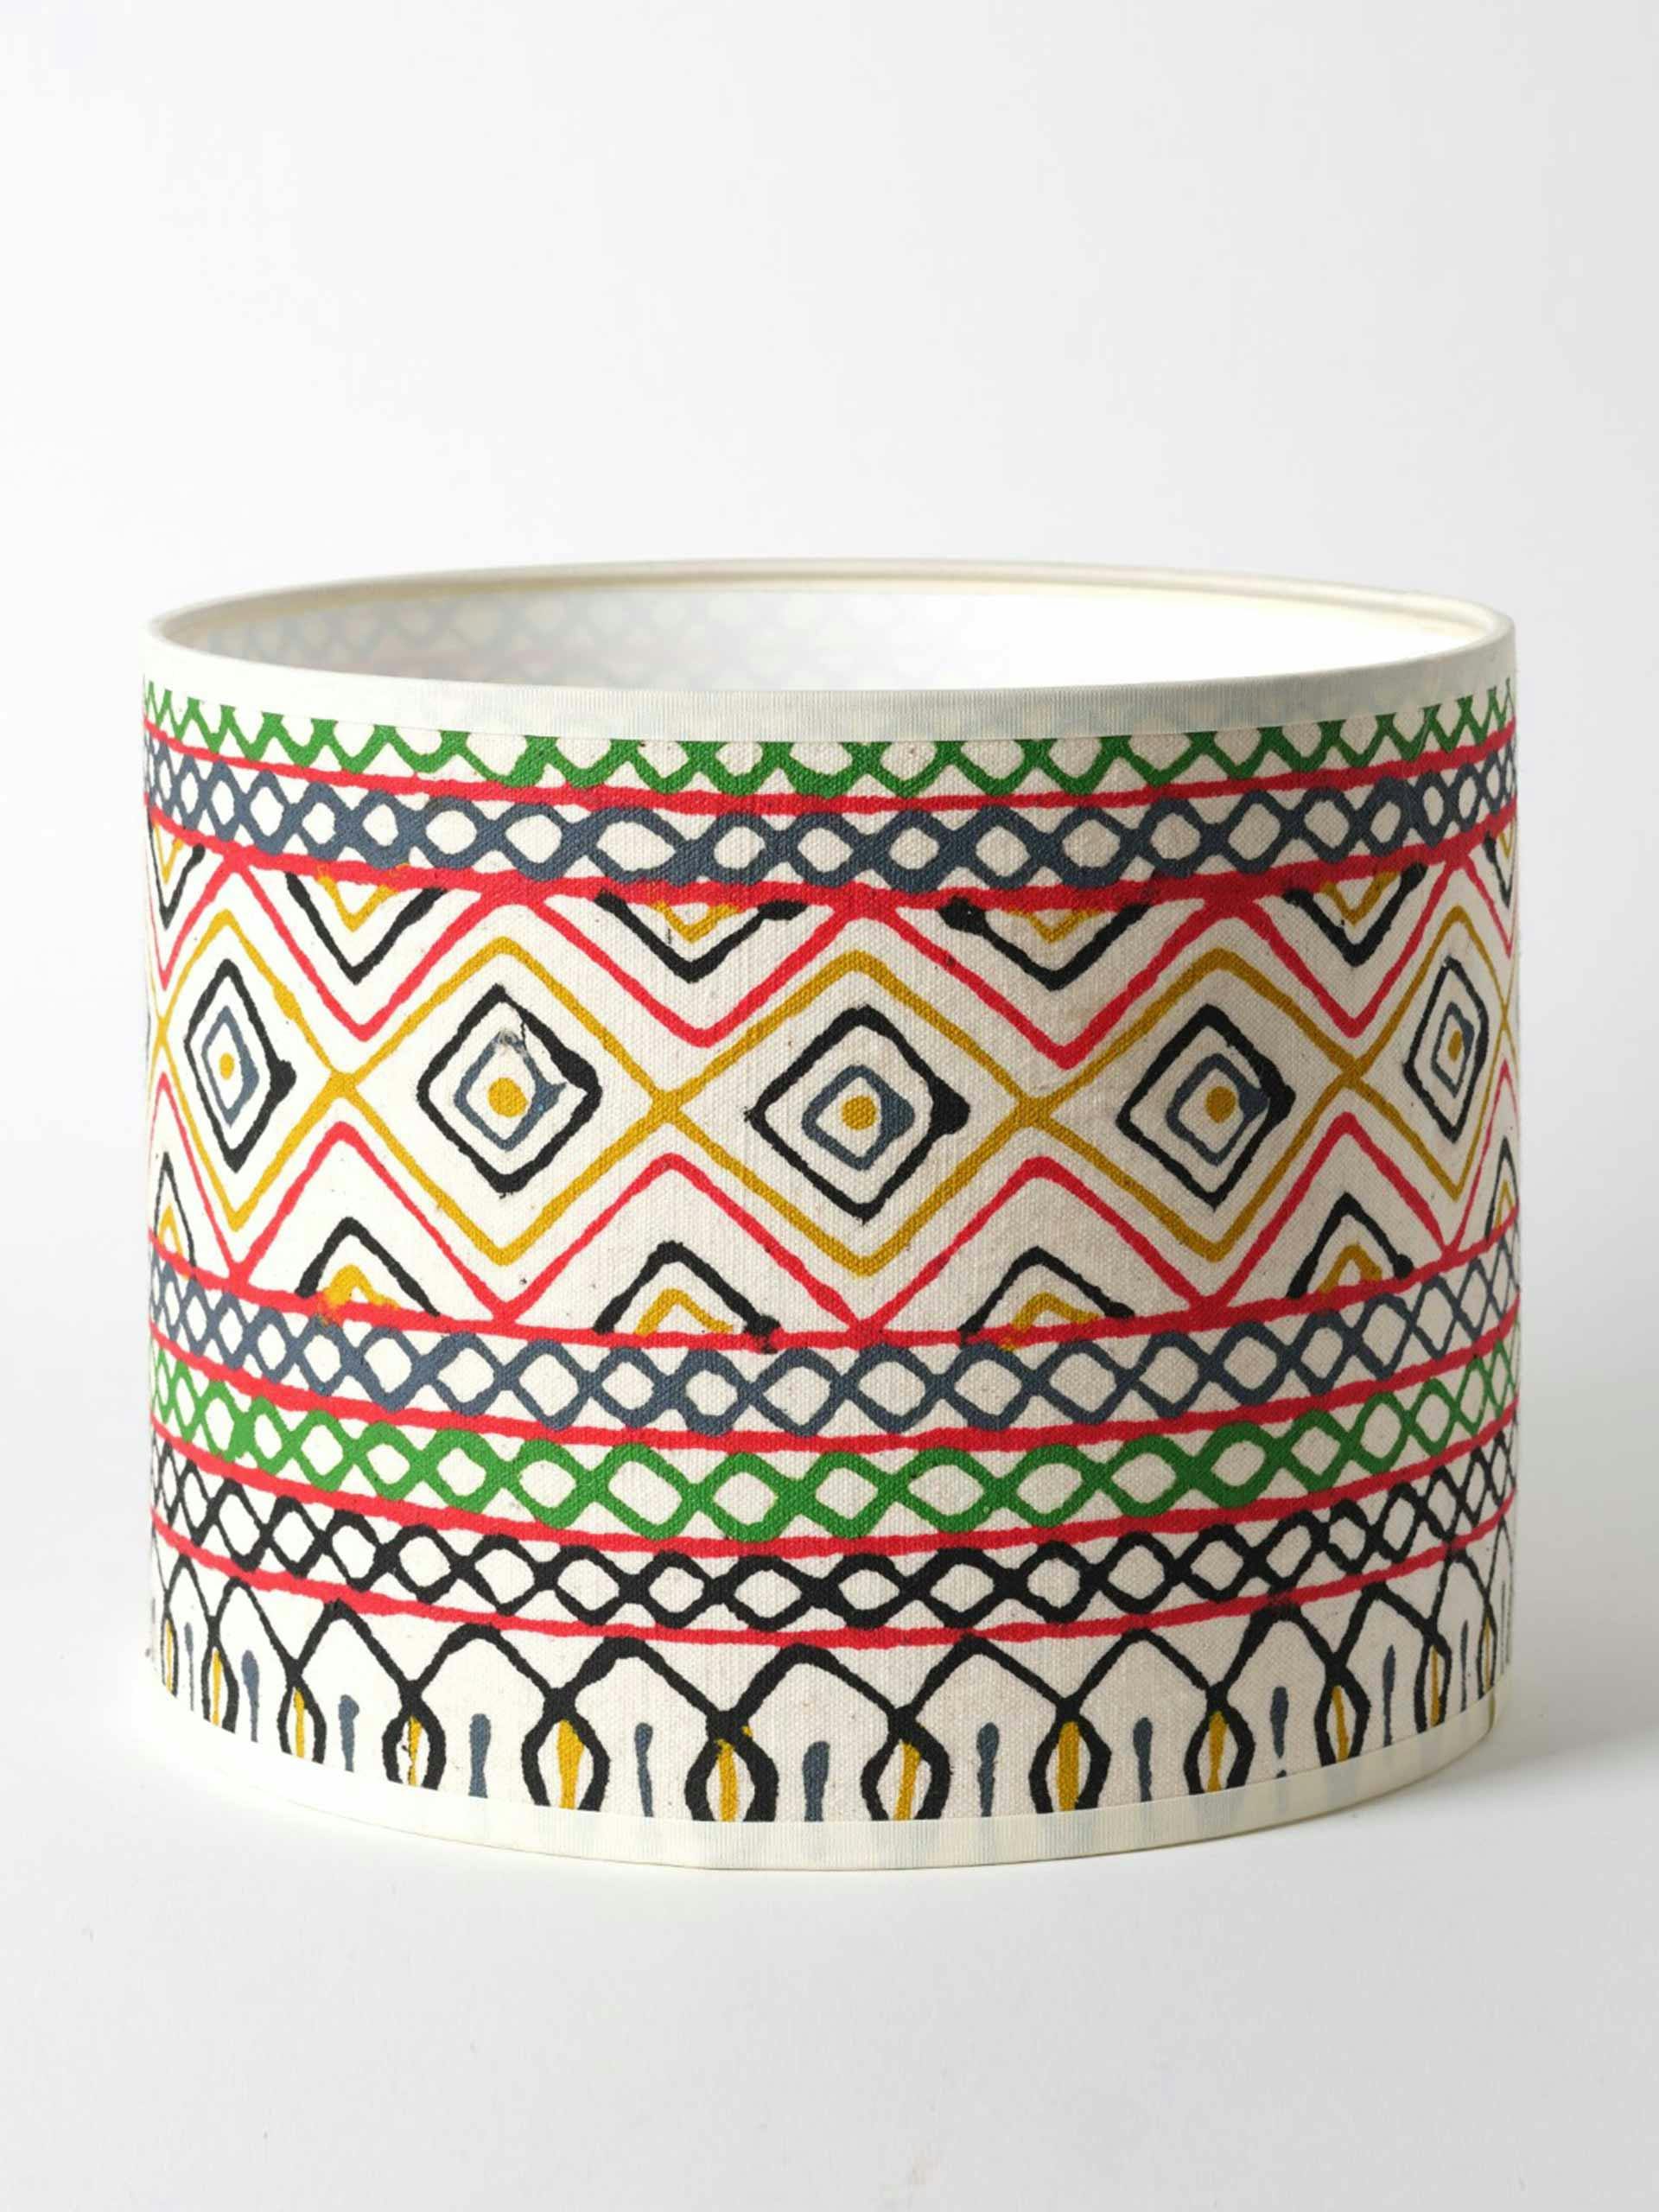 Hand painted drum lampshade